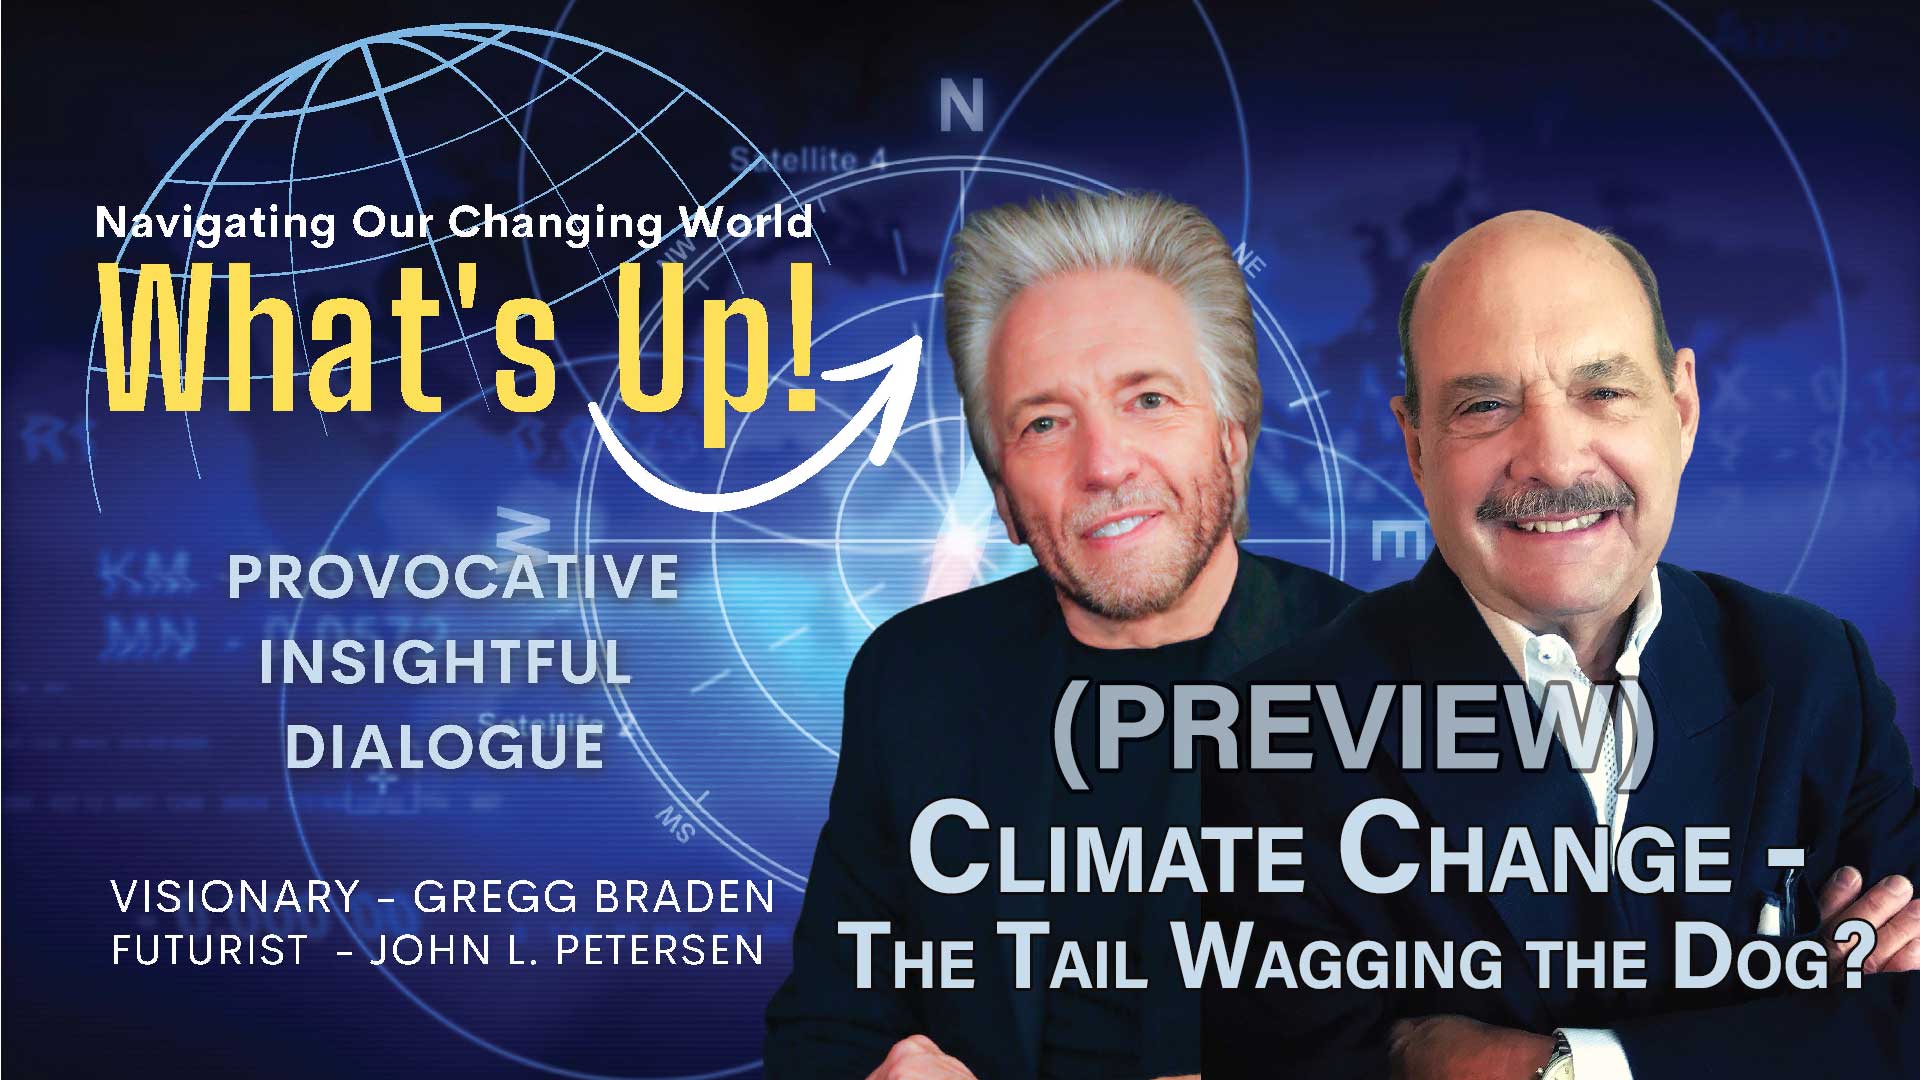 climate change - the tail wagging the dog